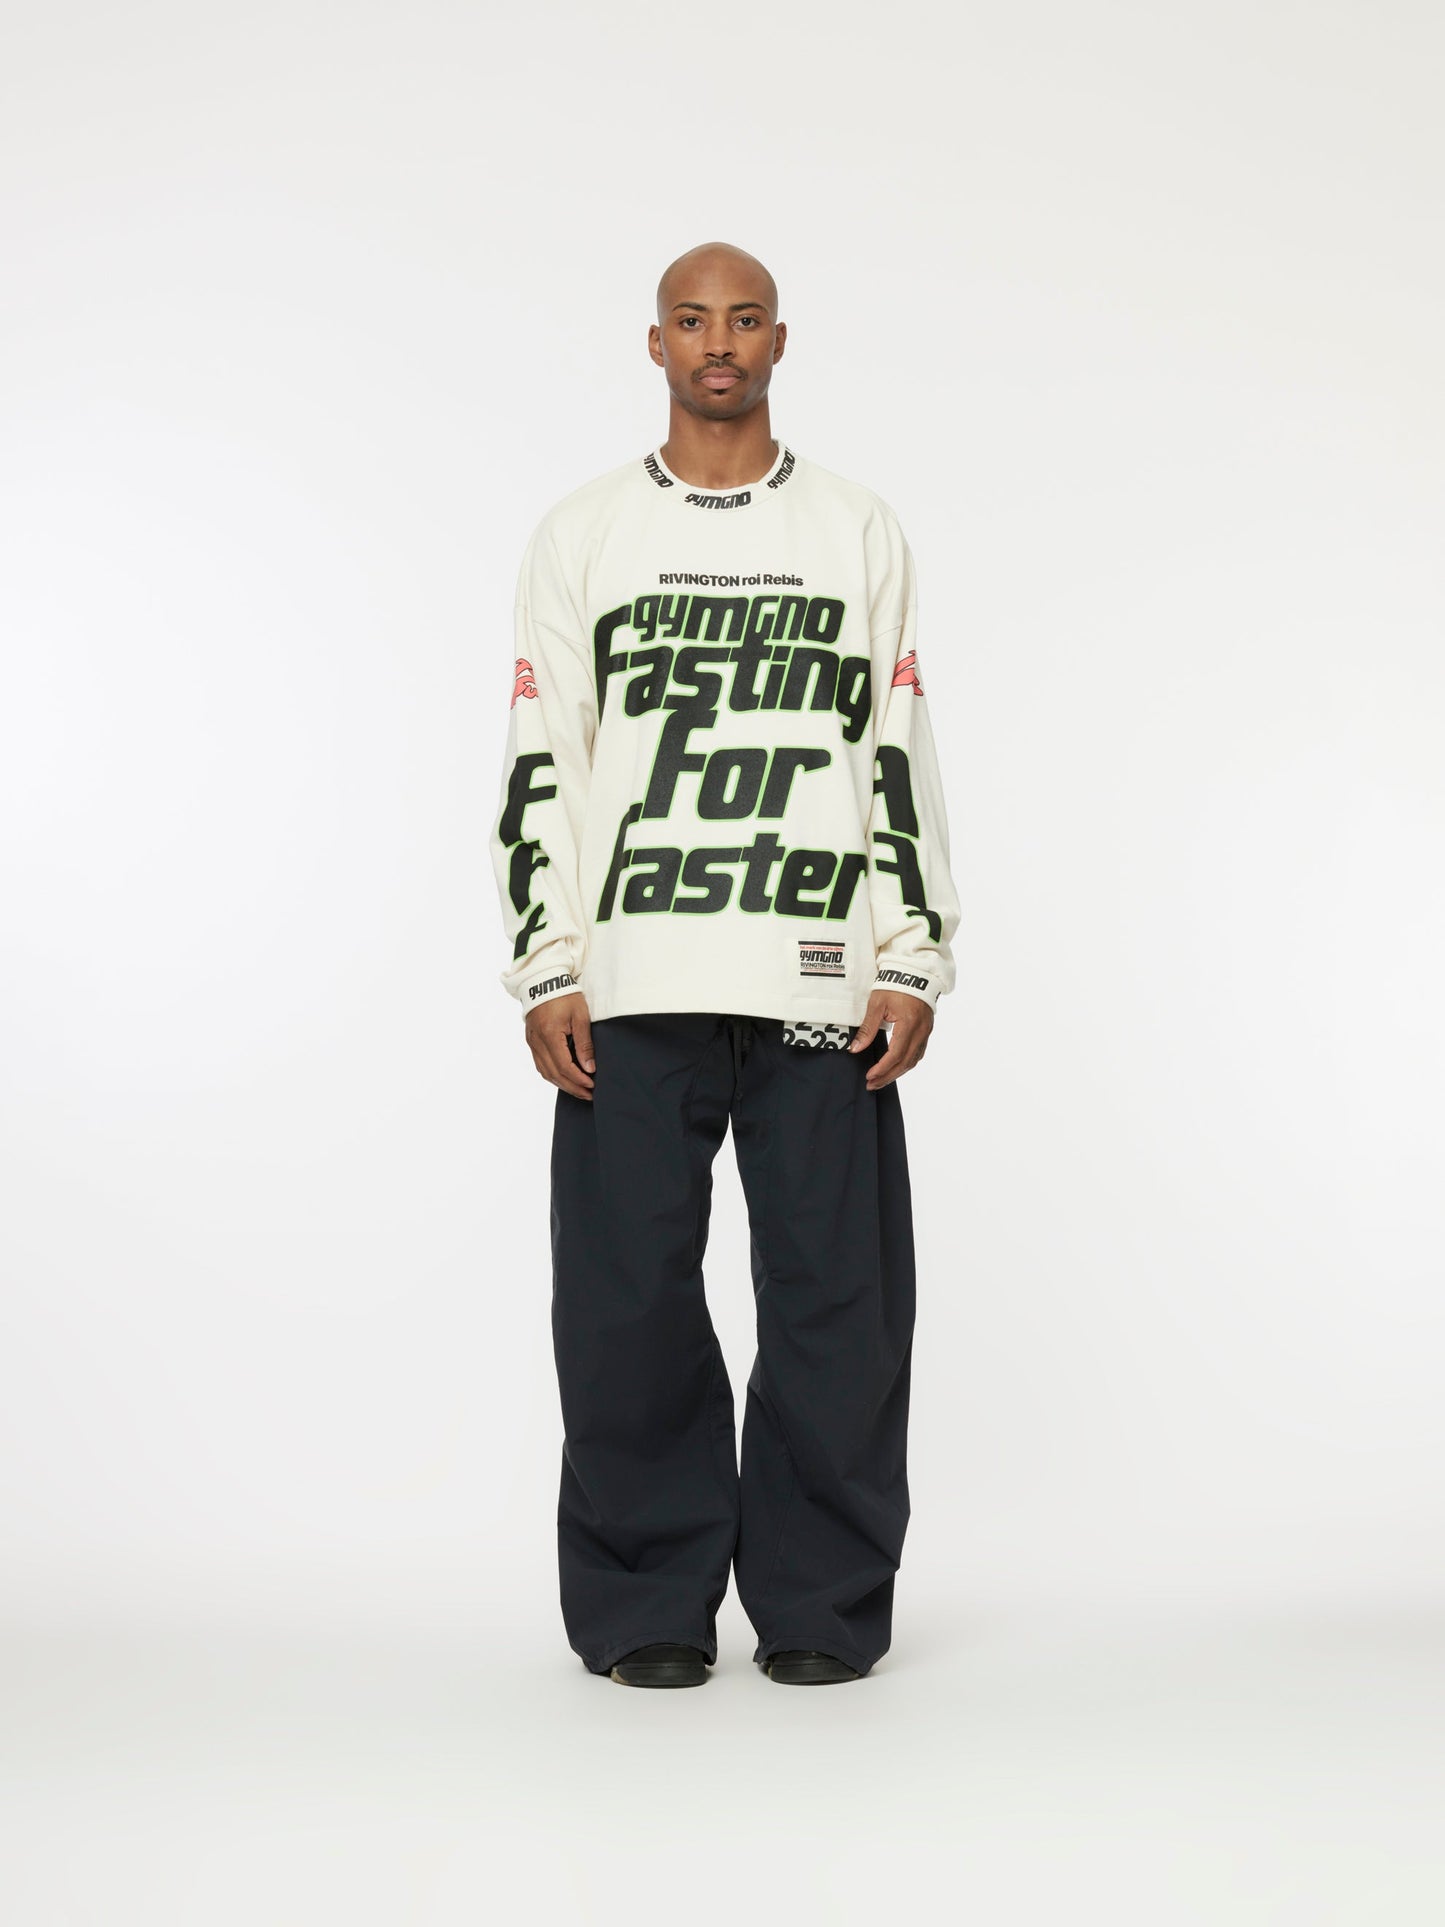 Fasting For Faster LS Tee  (Vintage White)